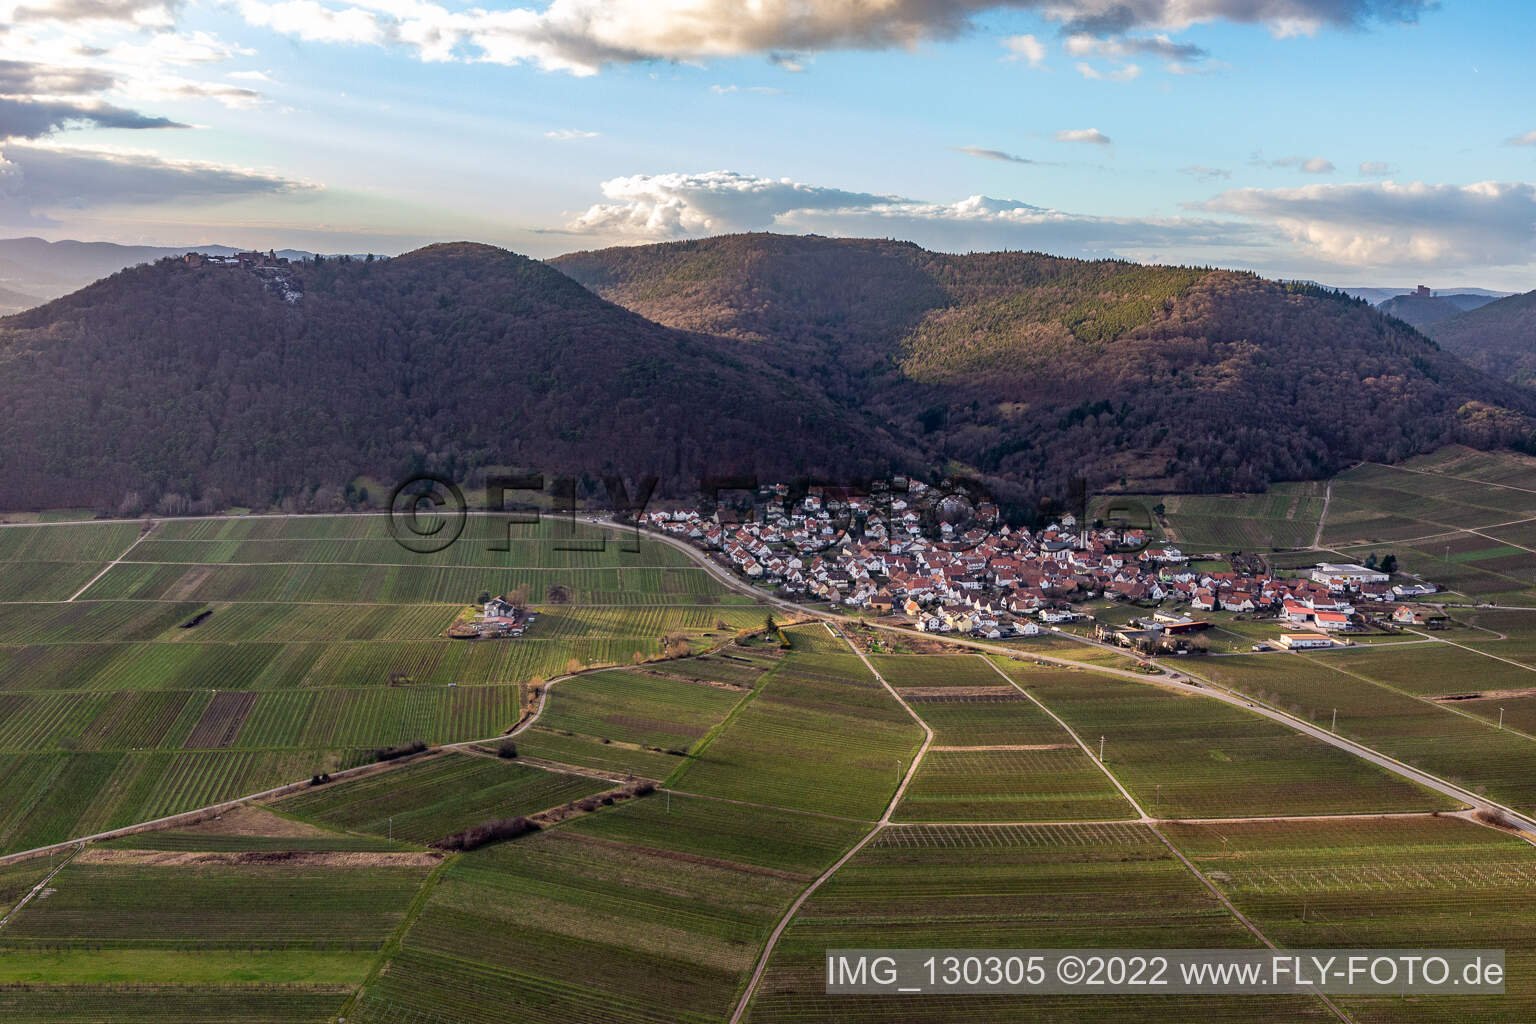 Aerial view of Eschbach in the state Rhineland-Palatinate, Germany